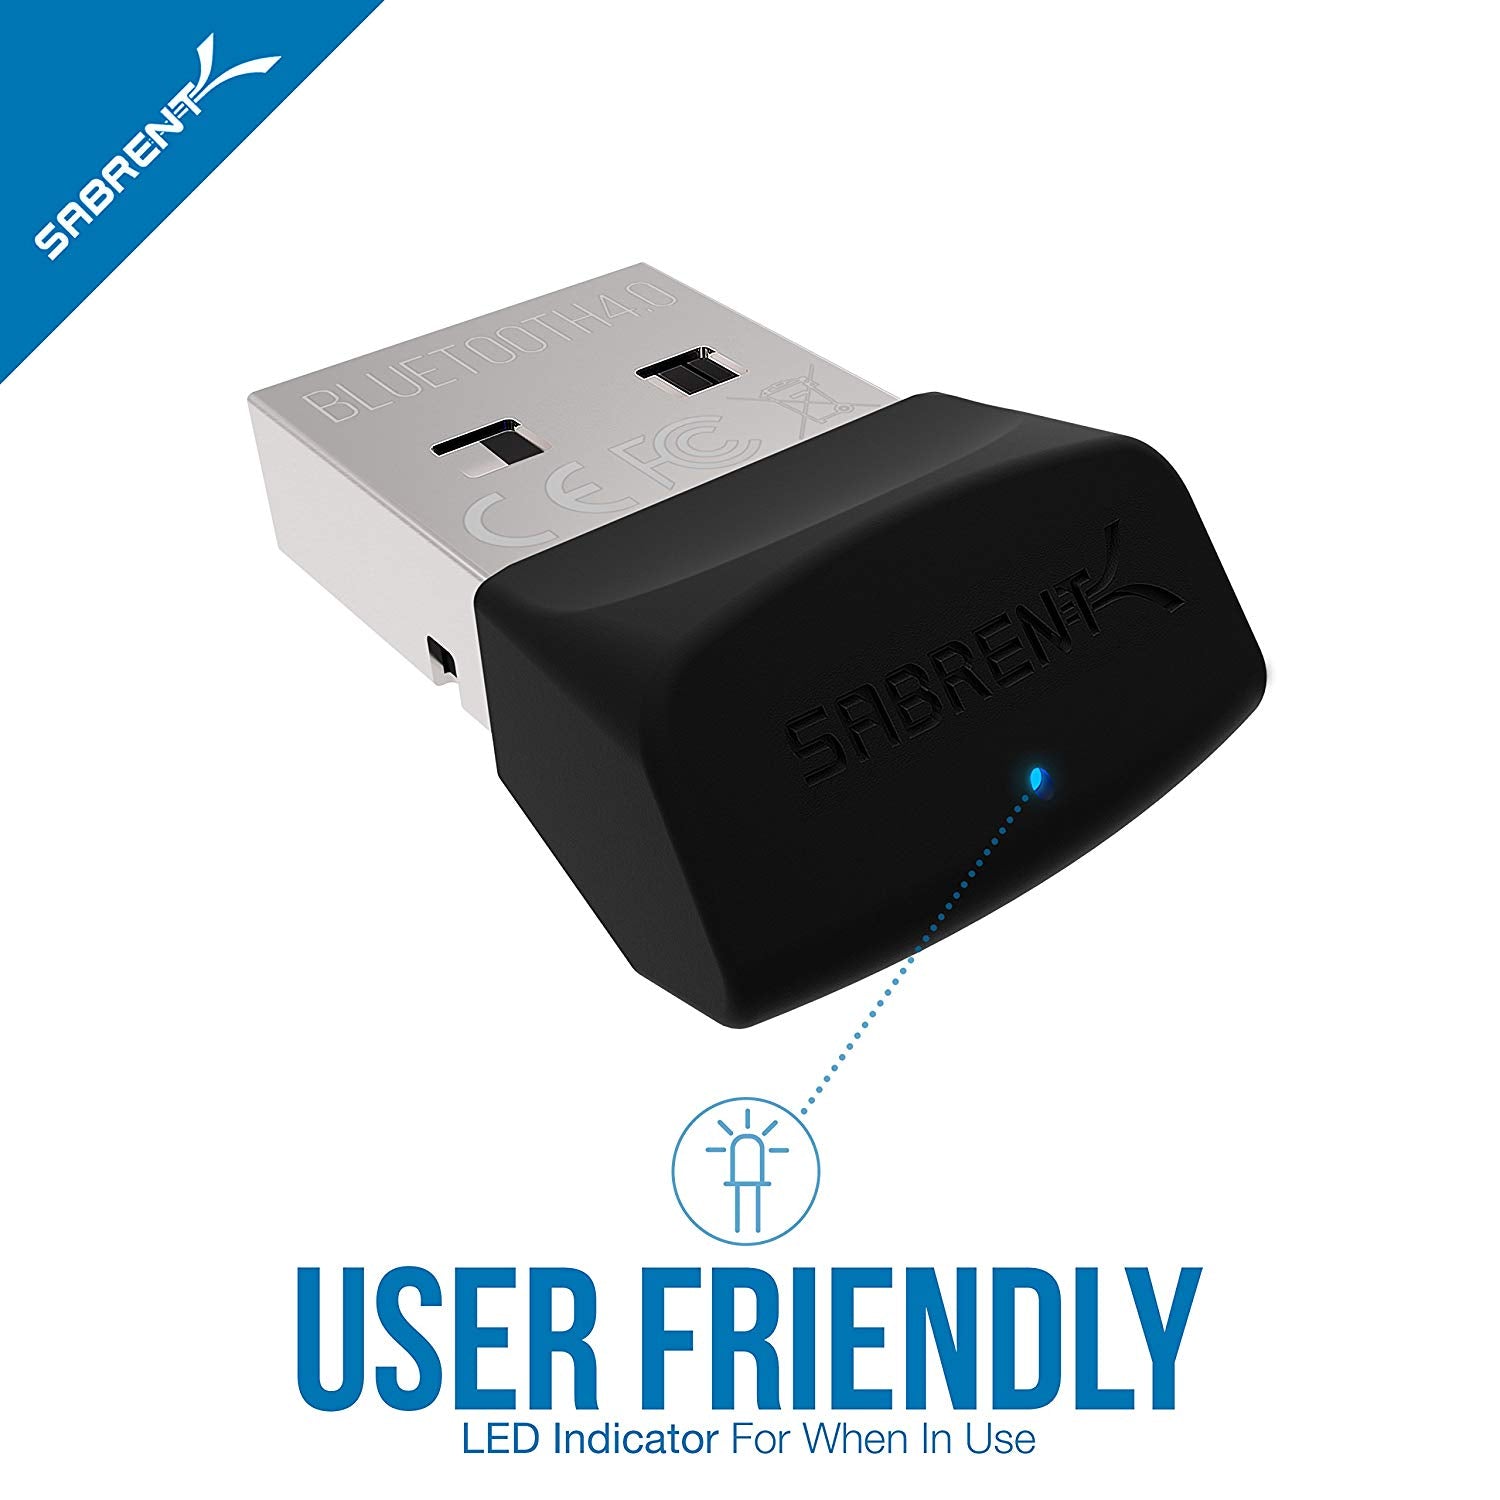 Filosofisch in beroep gaan Logisch USB Bluetooth 4.0 Micro Adapter for PC [v4.0 Class 2 with Low Energy T -  Sabrent